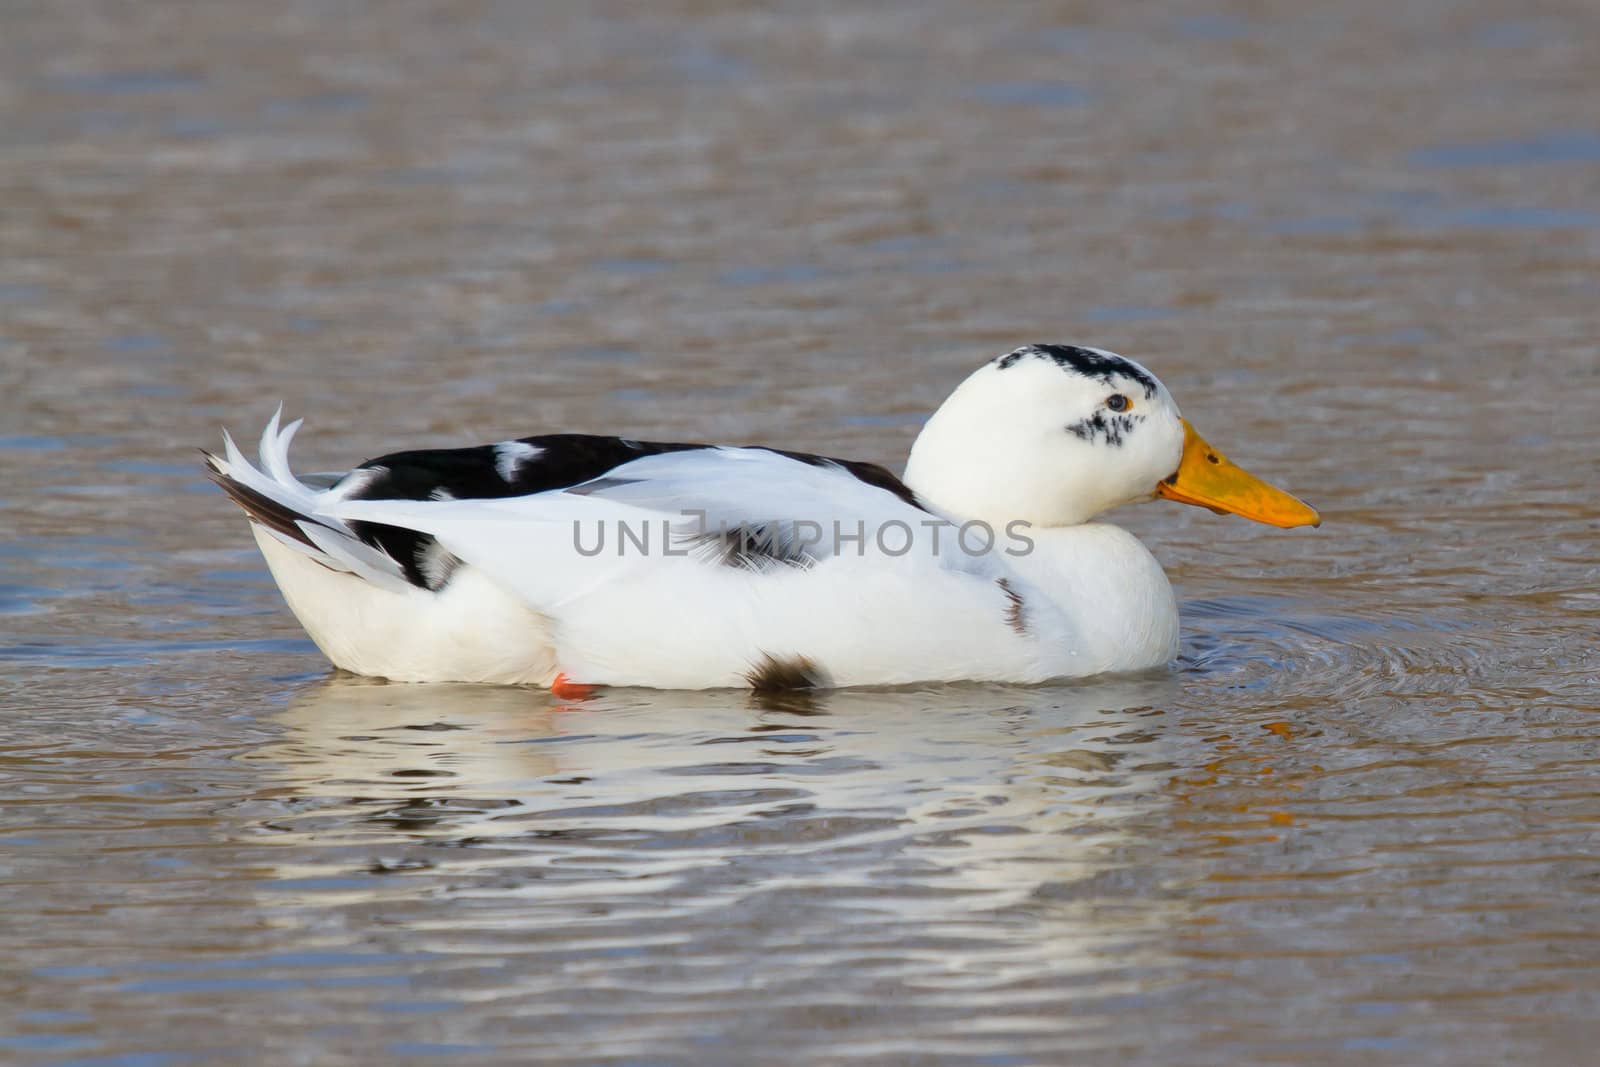 A wild duck in the water